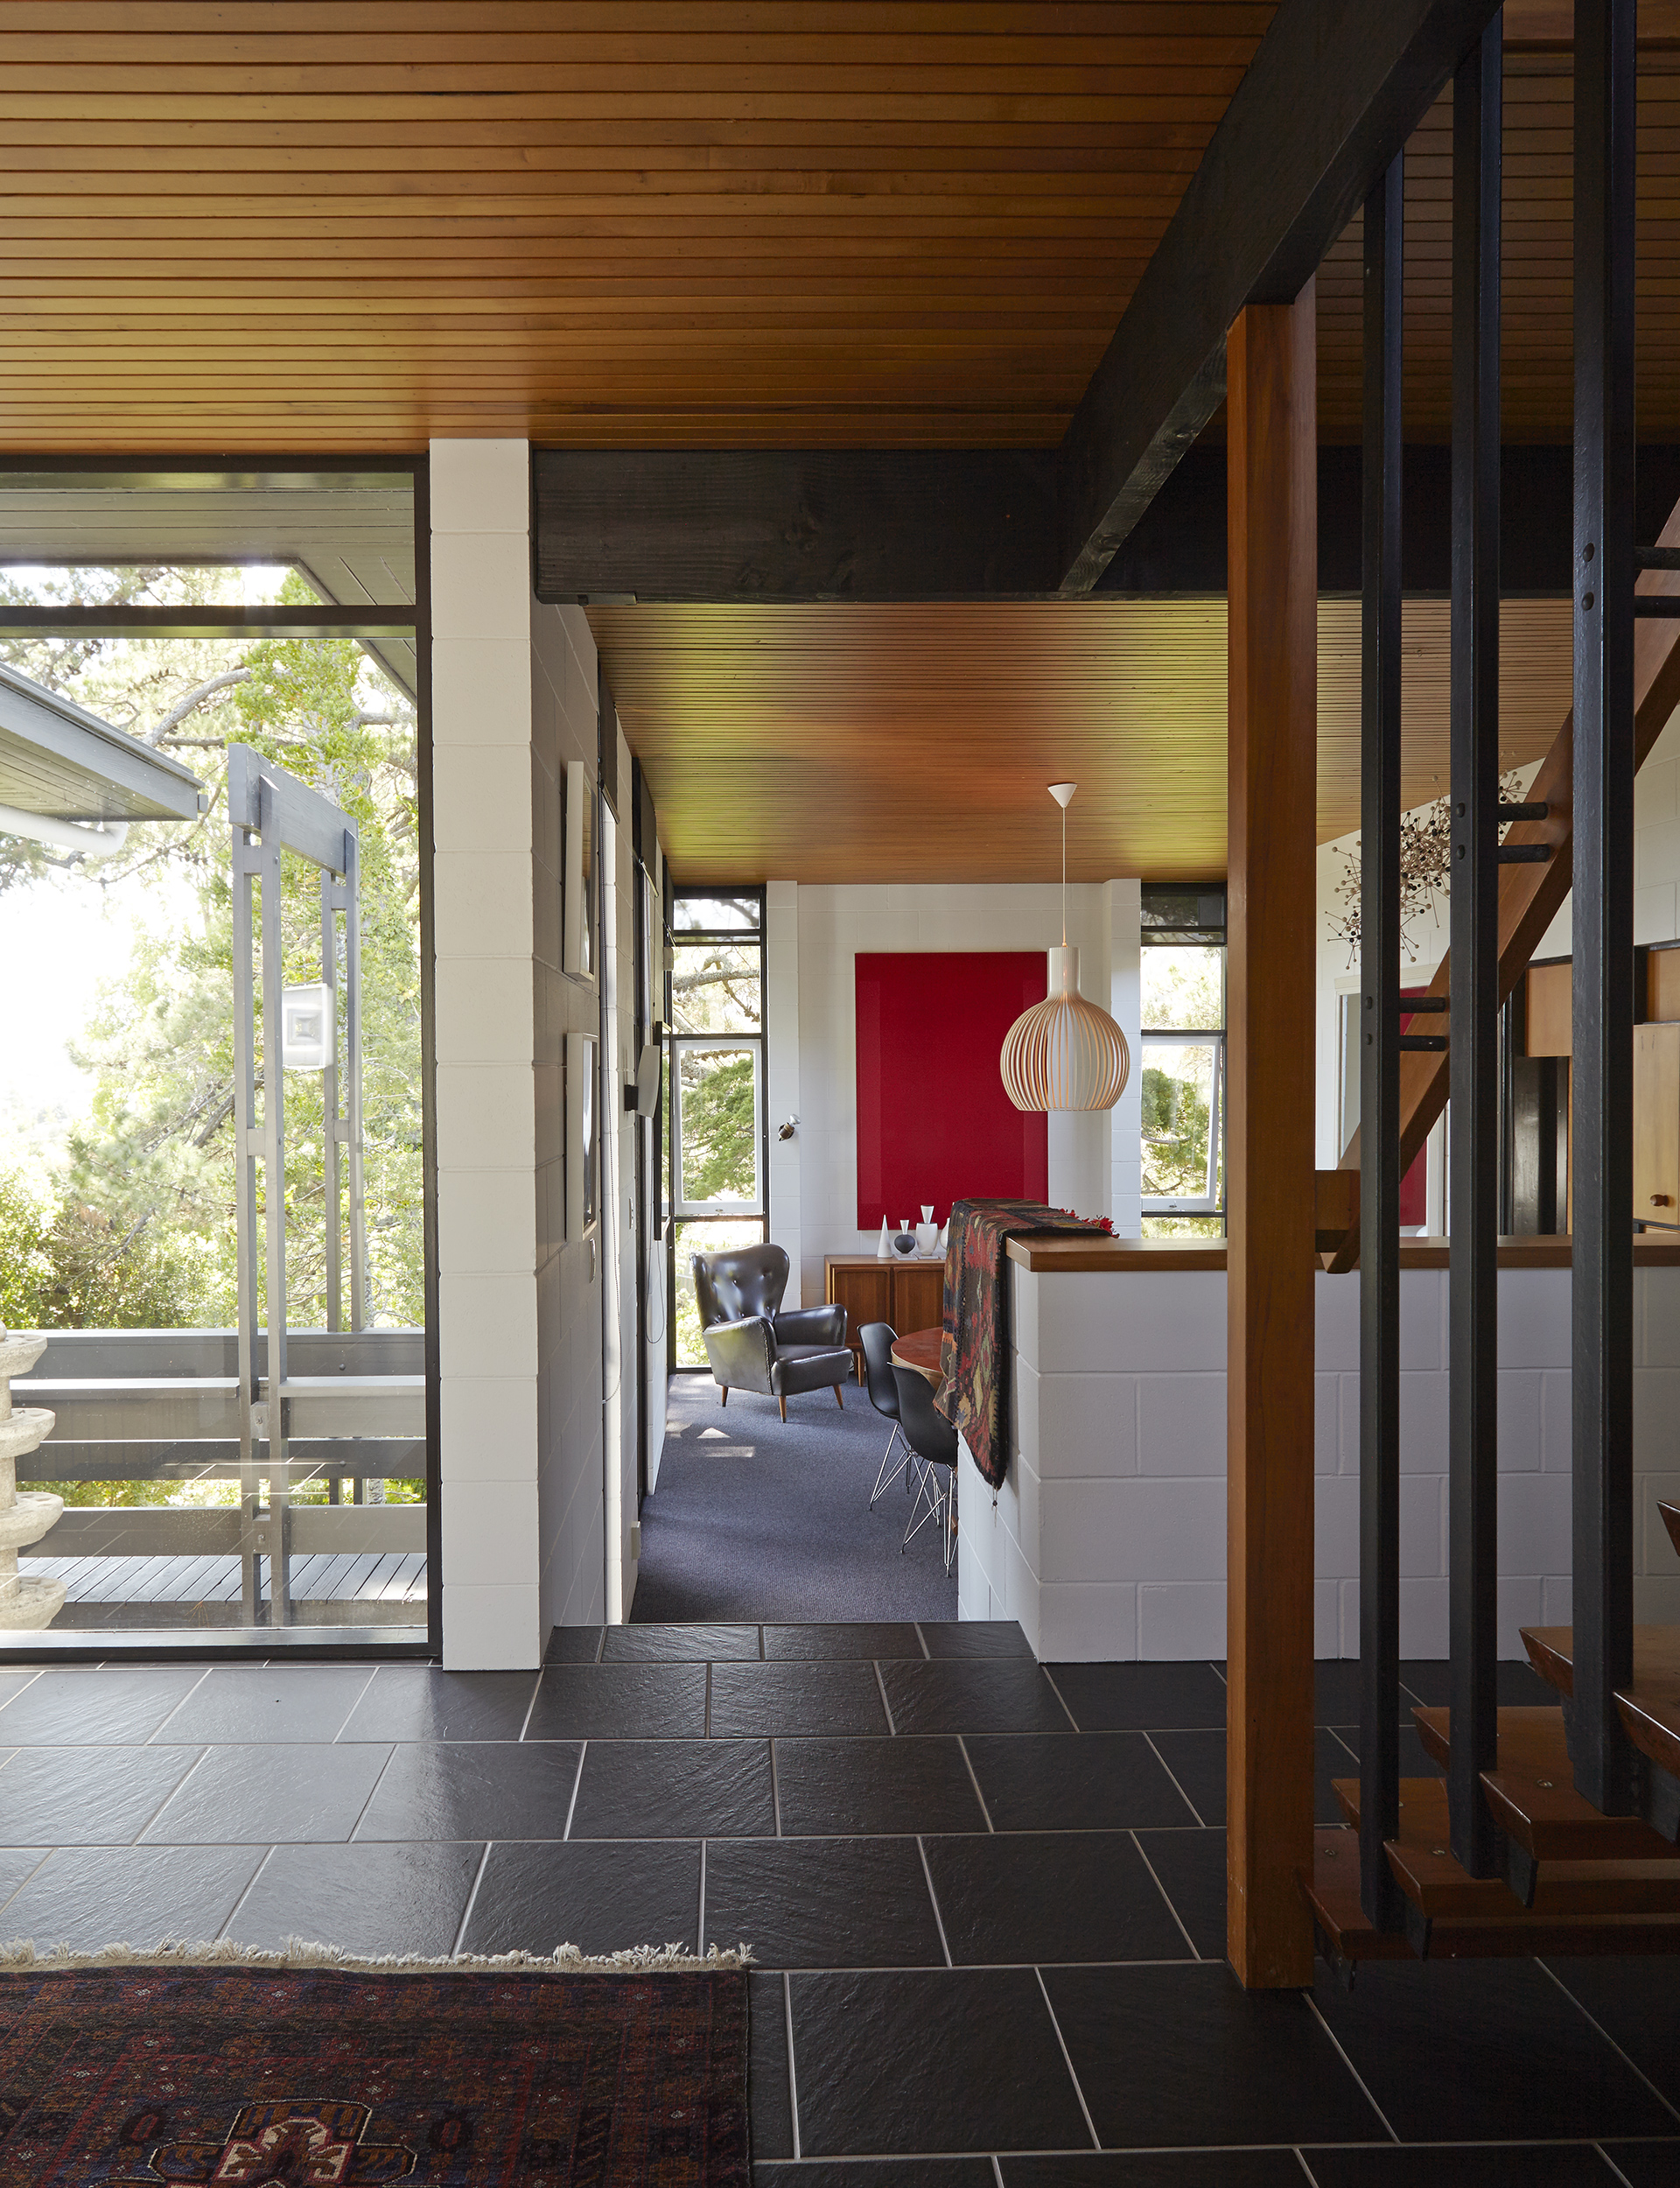 The entrance reveals the home’s original tawa ceiling. Beyond hangs an ‘Octo’ pendant light by Seppo Koho for Secto Design, and ‘Crimson/Red’, a work by Max Gimblett. 